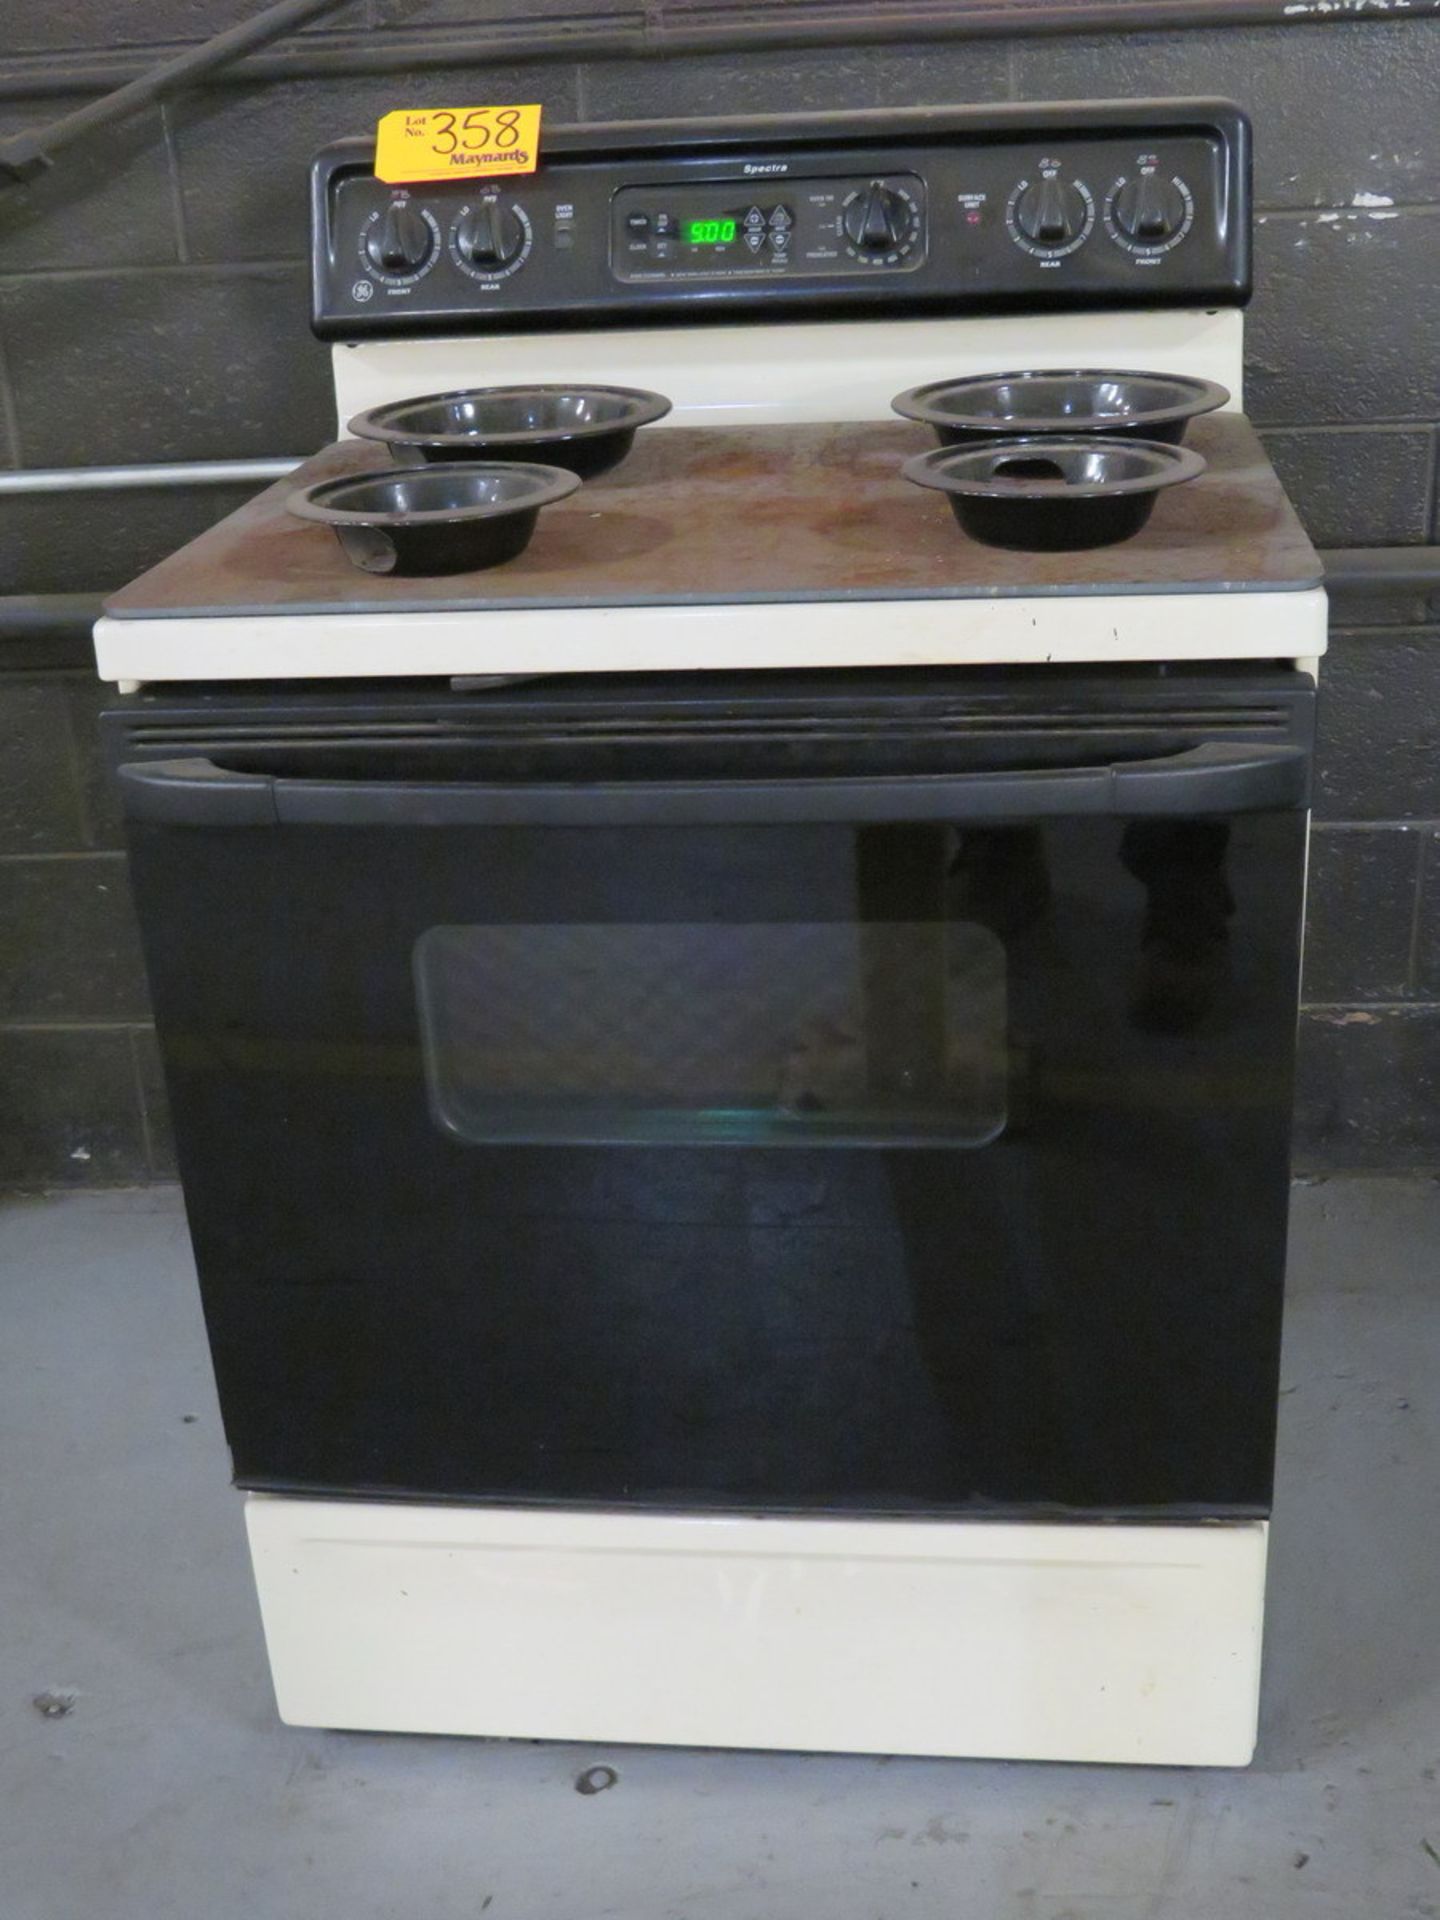 GE Spectra Electric Range with Oven